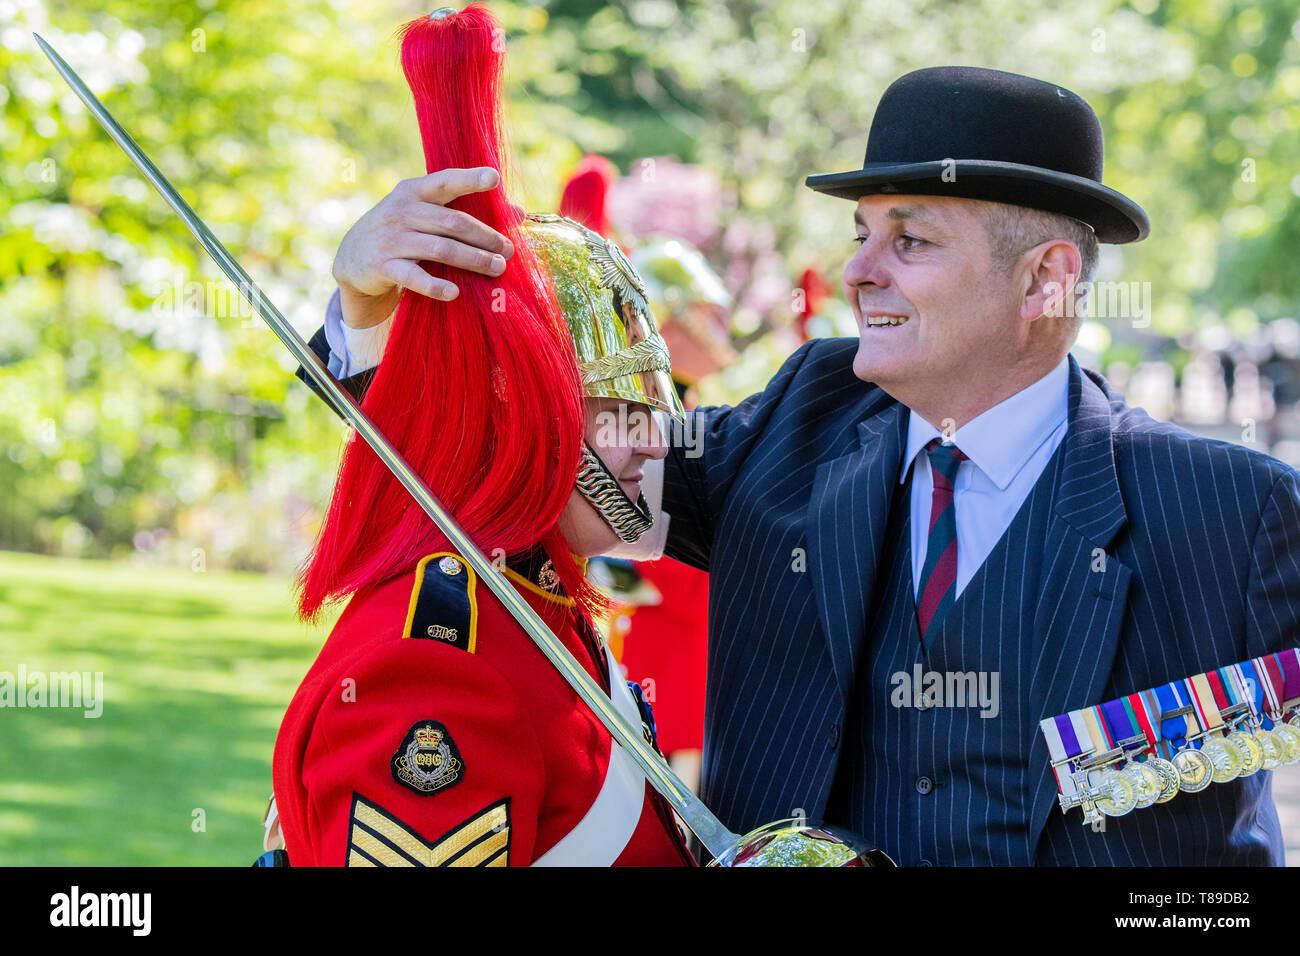 London, UK. 12th May, 2019. Final inspection - His Royal Highness The Prince of Wales, Field Marshal, Colonel in Chief 1ST The Queen’s Dragoon Guards, takes the salute at the Annual Parade and Service of The Combined Cavalry Old Comrades Association at the Cavalry Memorial adjacent to the Bandstand in Hyde Park. It is 95 years on from the unveiling and dedication of its memorial in Hyde Park. Credit: Guy Bell/Alamy Live News Stock Photo